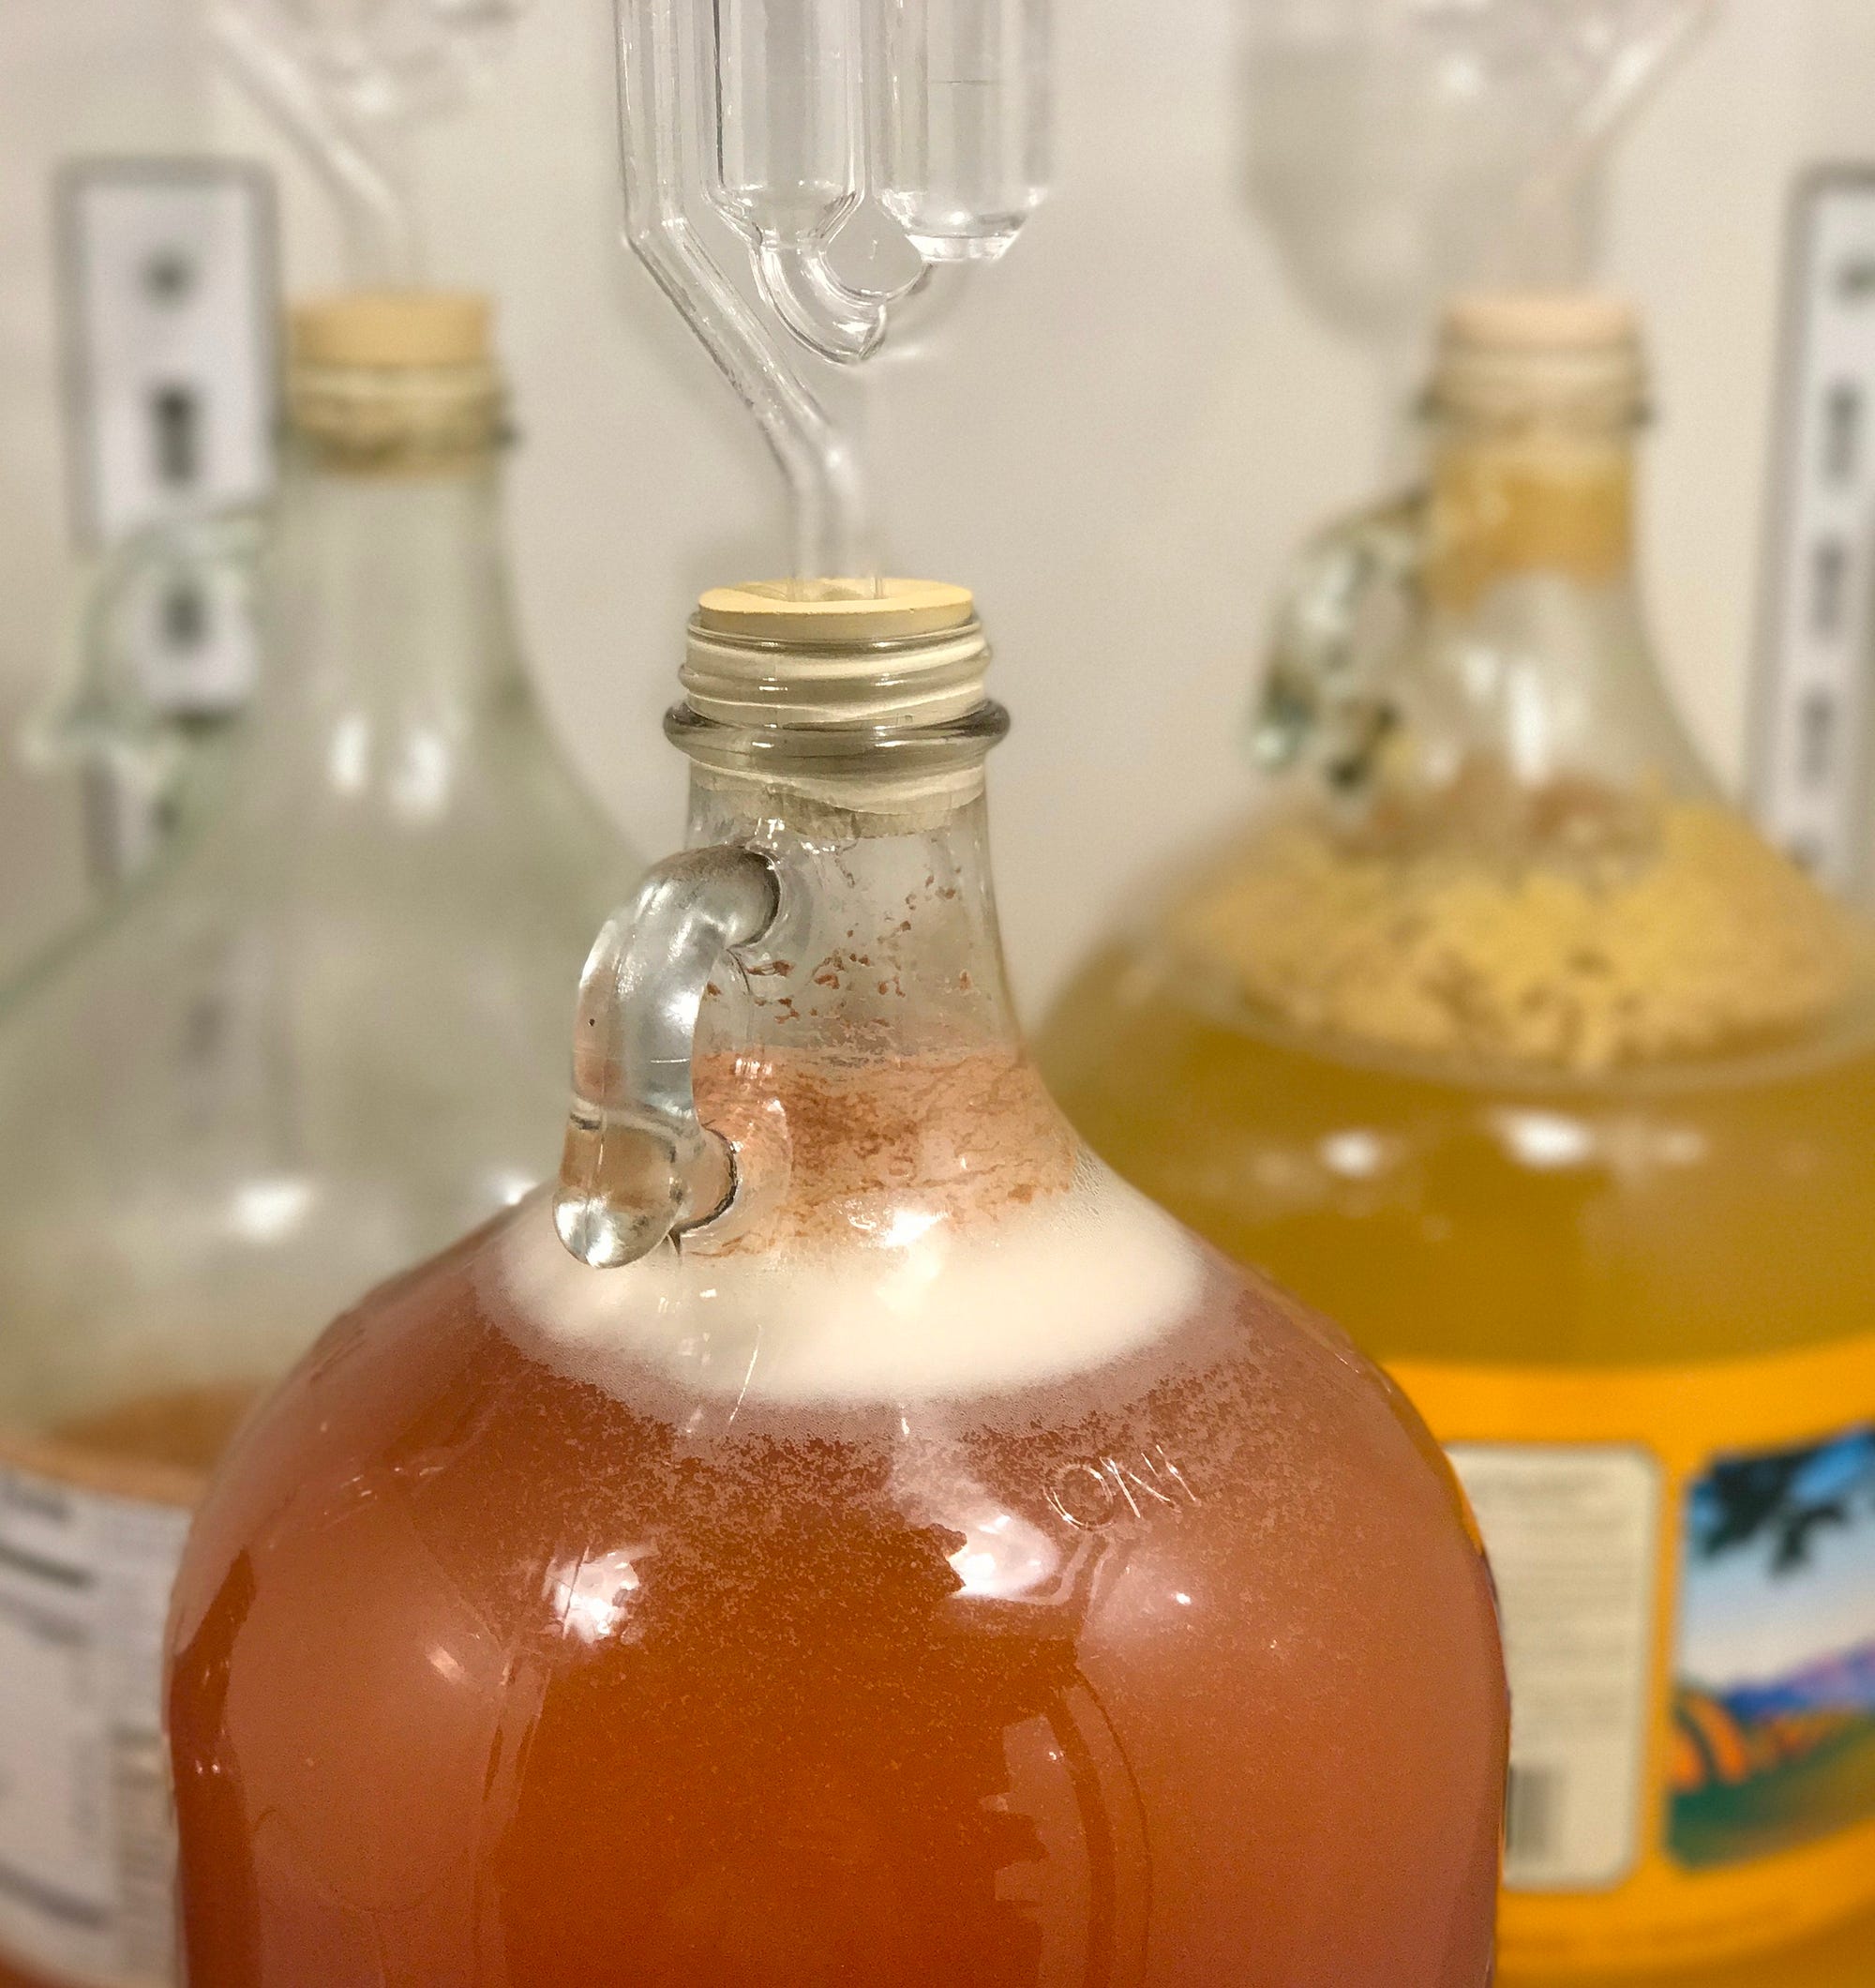 Adventures In DIY Cider Fermentation Everything You Need To Know by Food Republic Medium